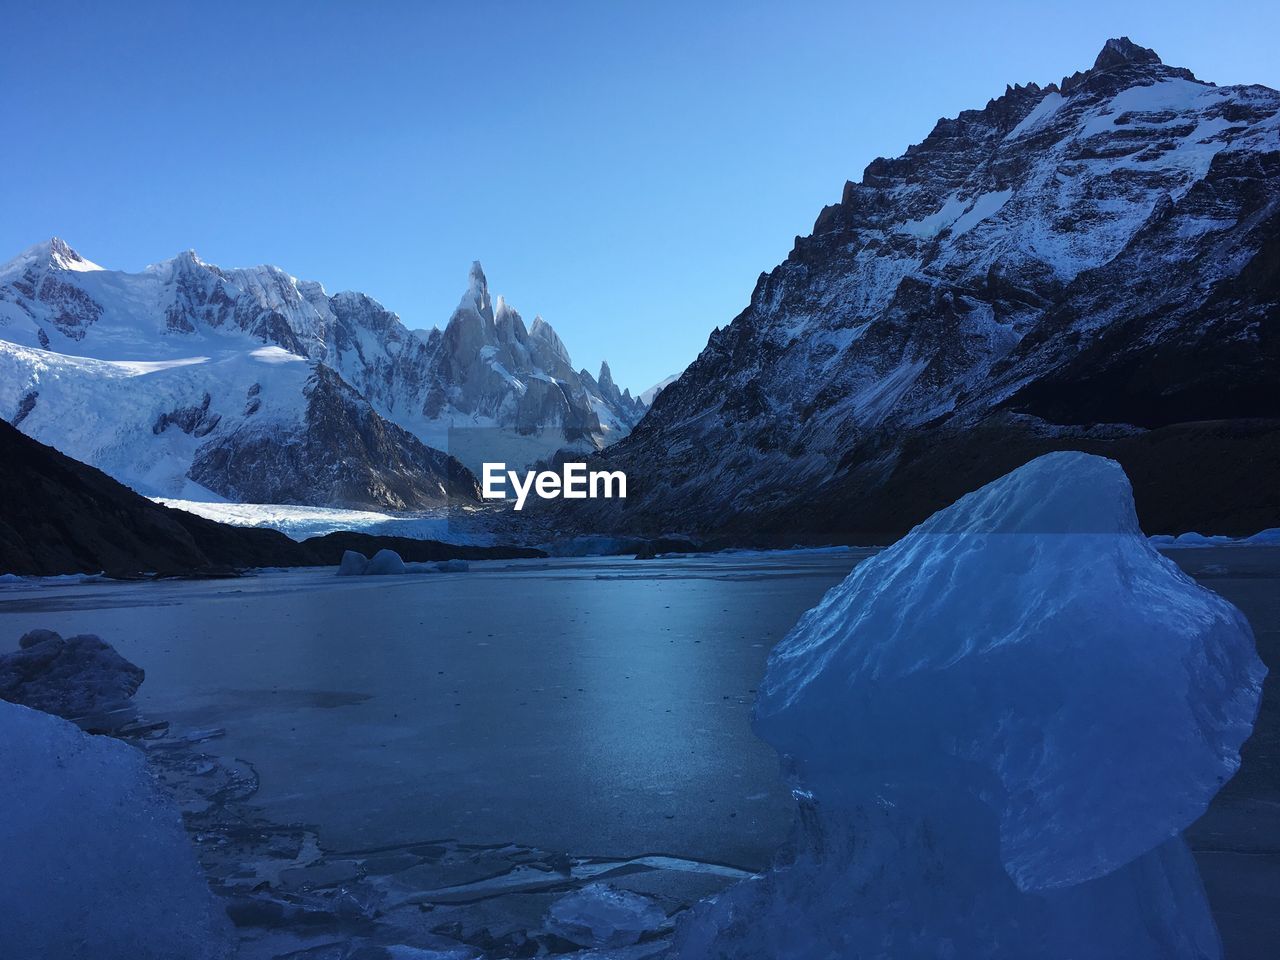 Frozen lake with mountains in background